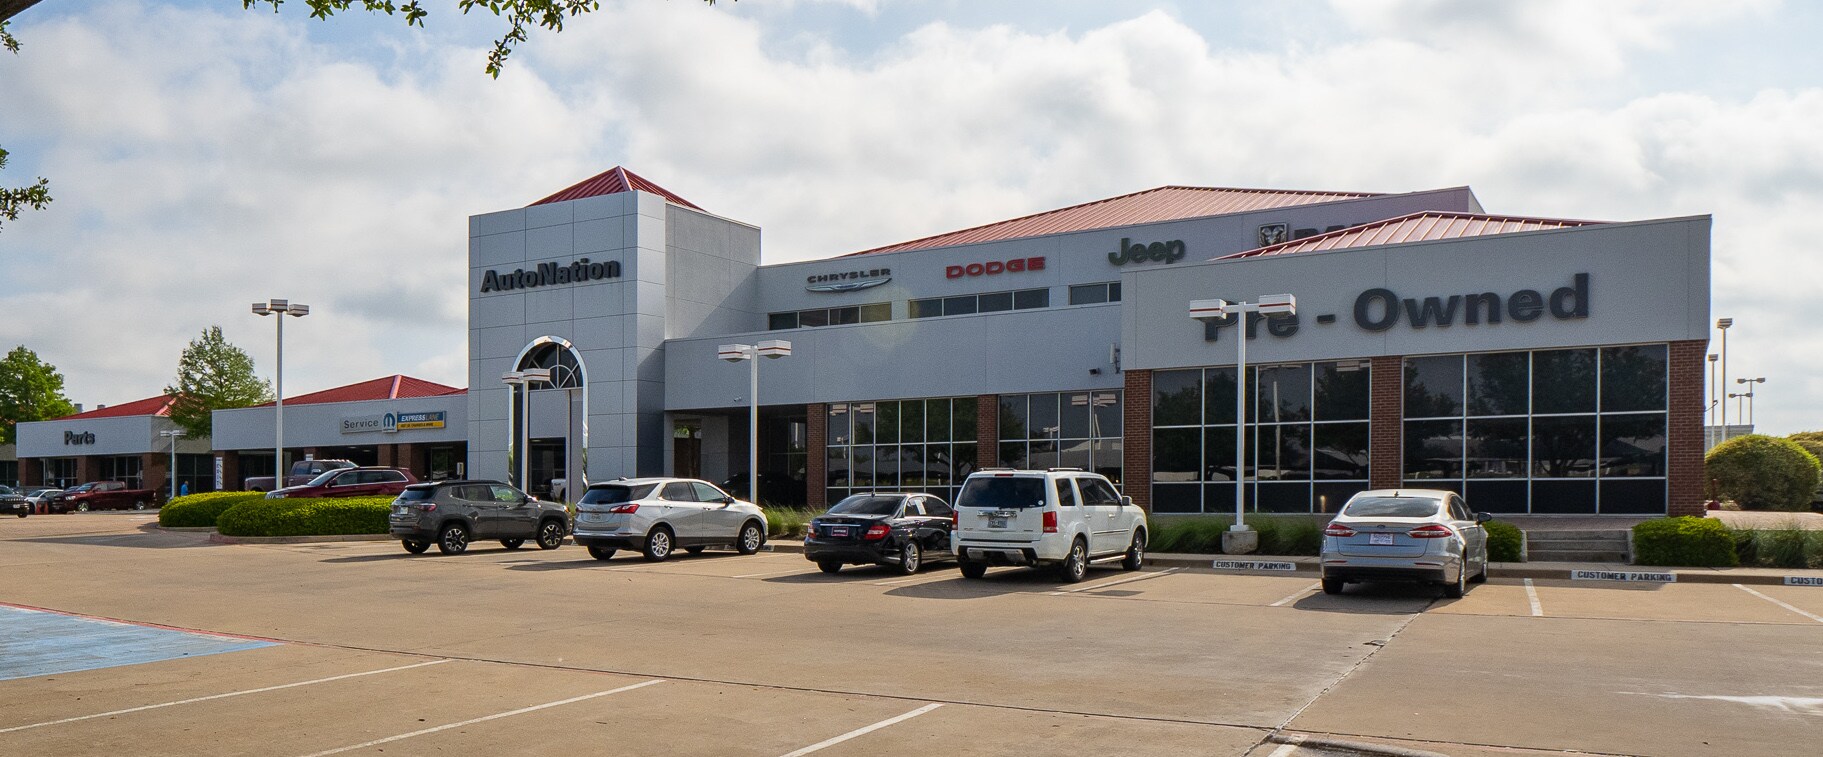 Exterior view of AutoNation Chrysler Dodge Jeep Ram North Fort Worth